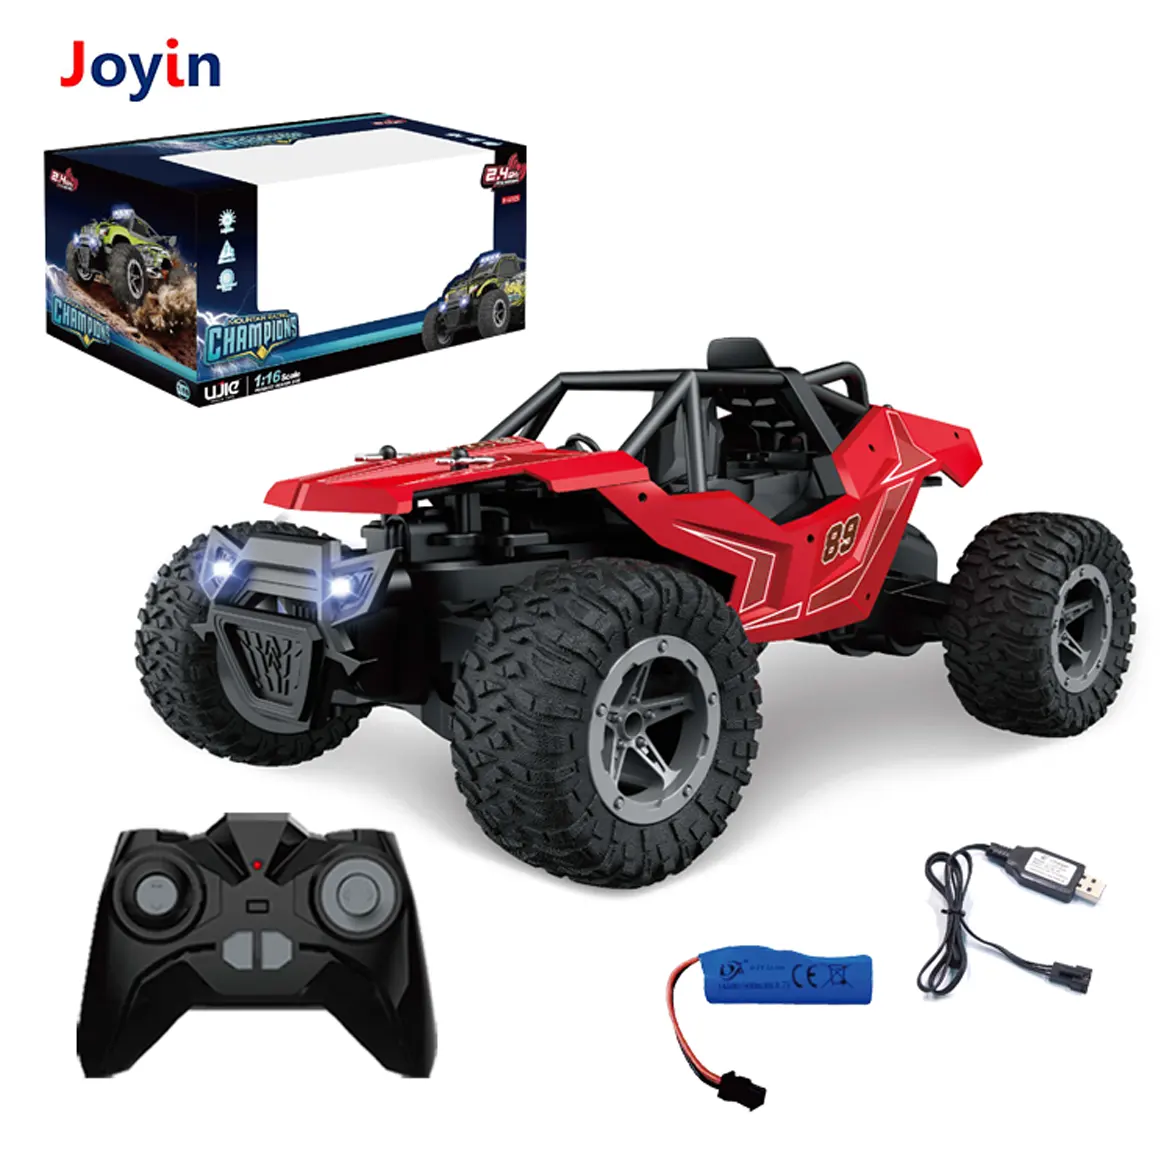 Large Car Toy 2WD 1:16 2.4G Motors Monster Truck Big Thar Toy Kids Remote Control RC Racing Car Off-Road Vehicle